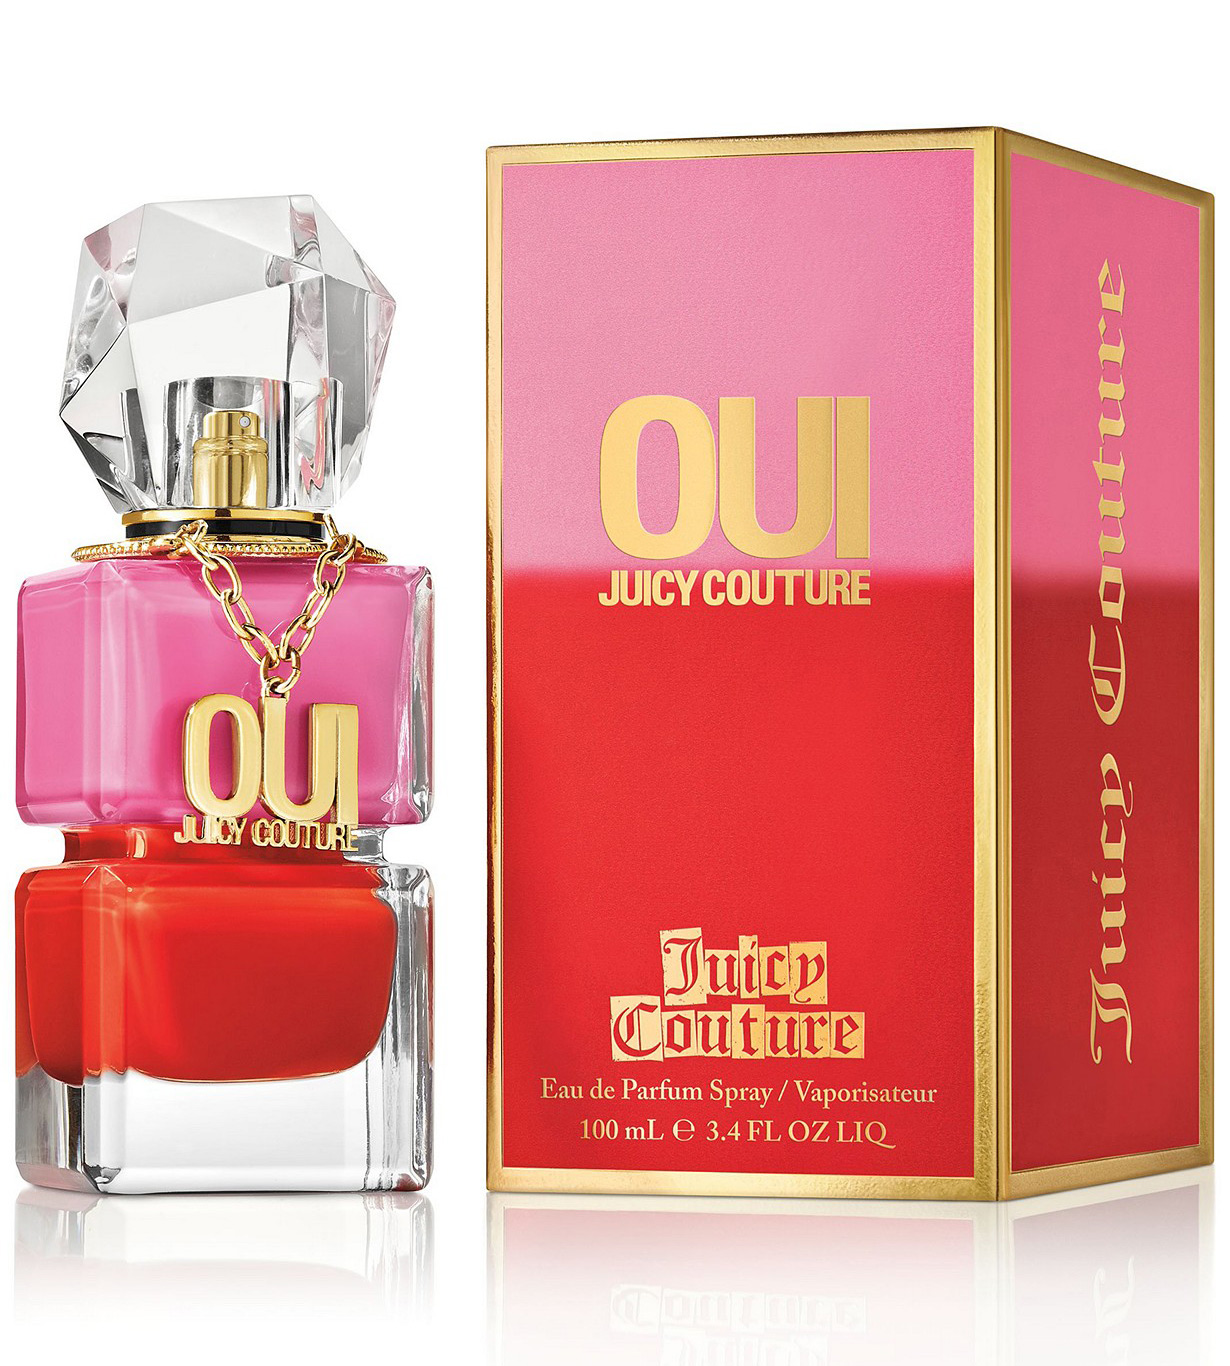 Juicy Couture Oui Juicy Couture perfume - a fragrance for women 2018